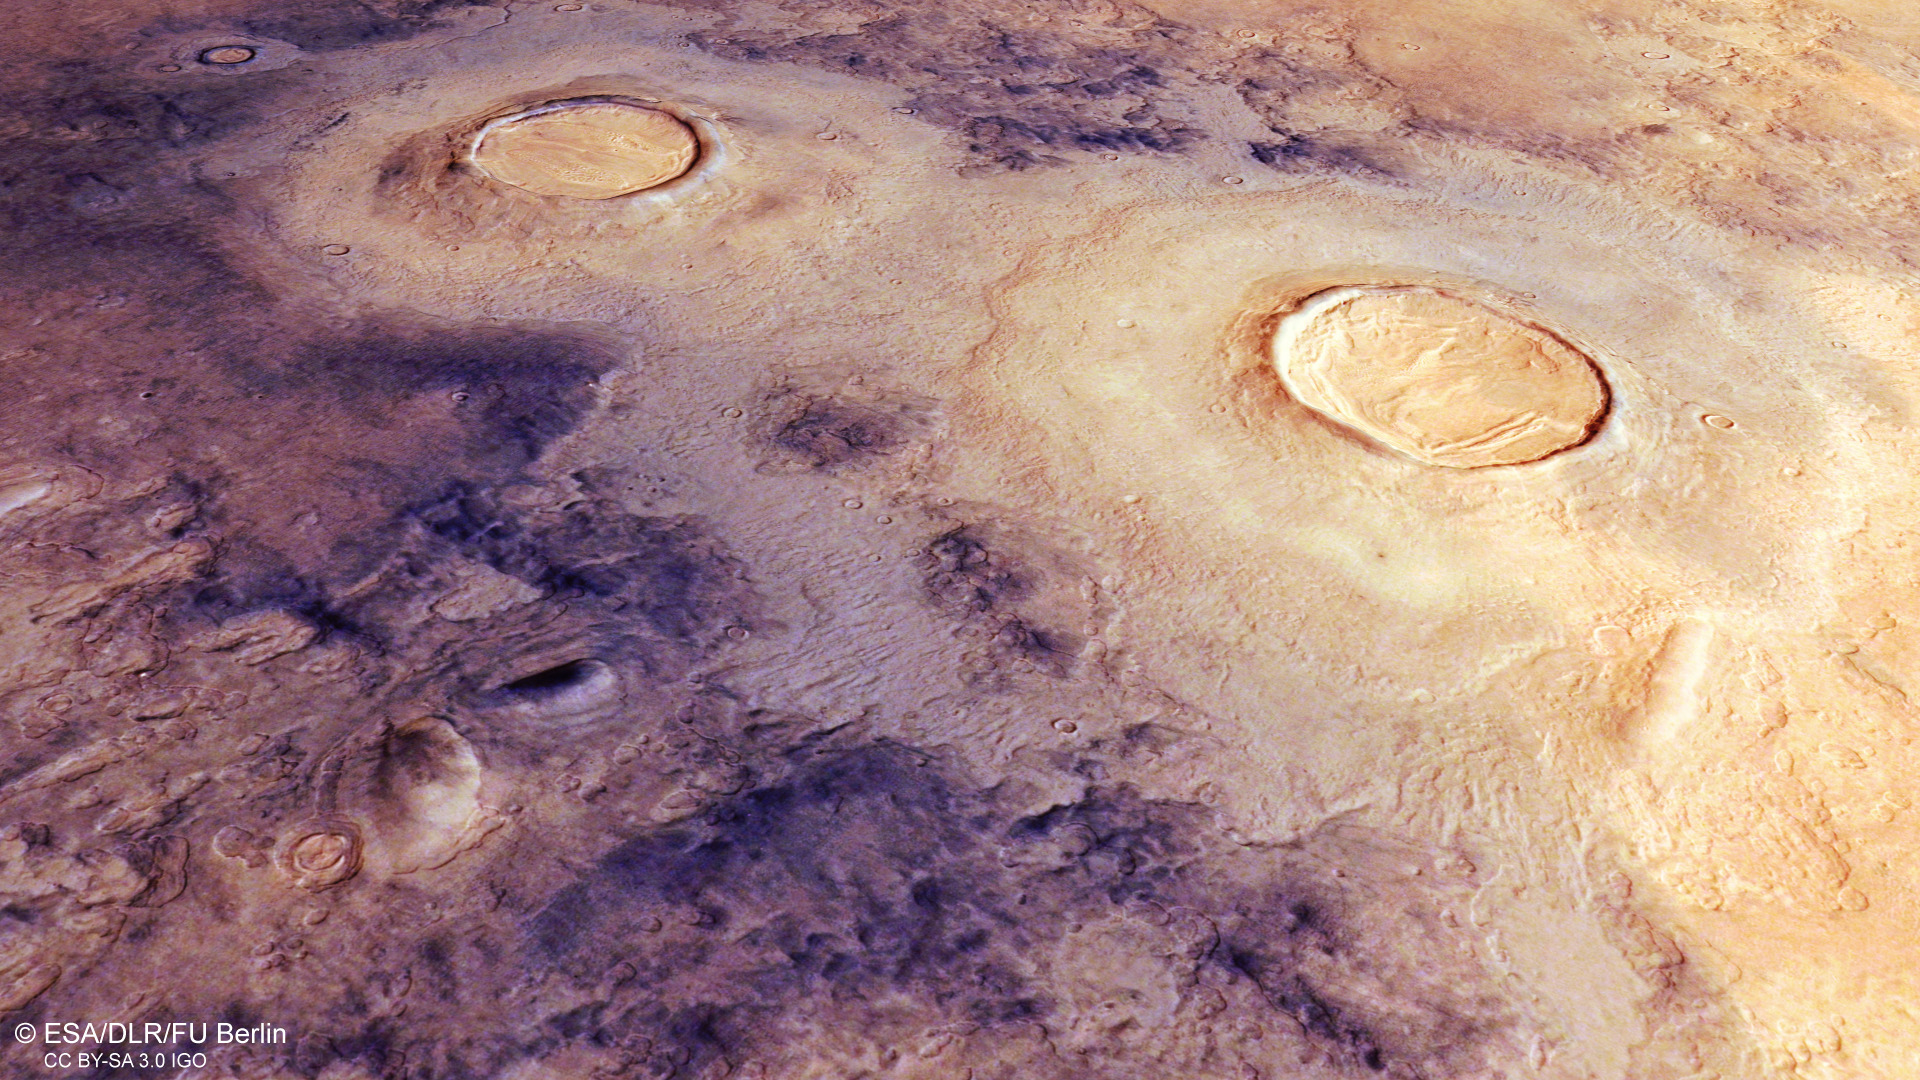 Mars crater complex shows layers of ice in stunning spacecraft photos thumbnail